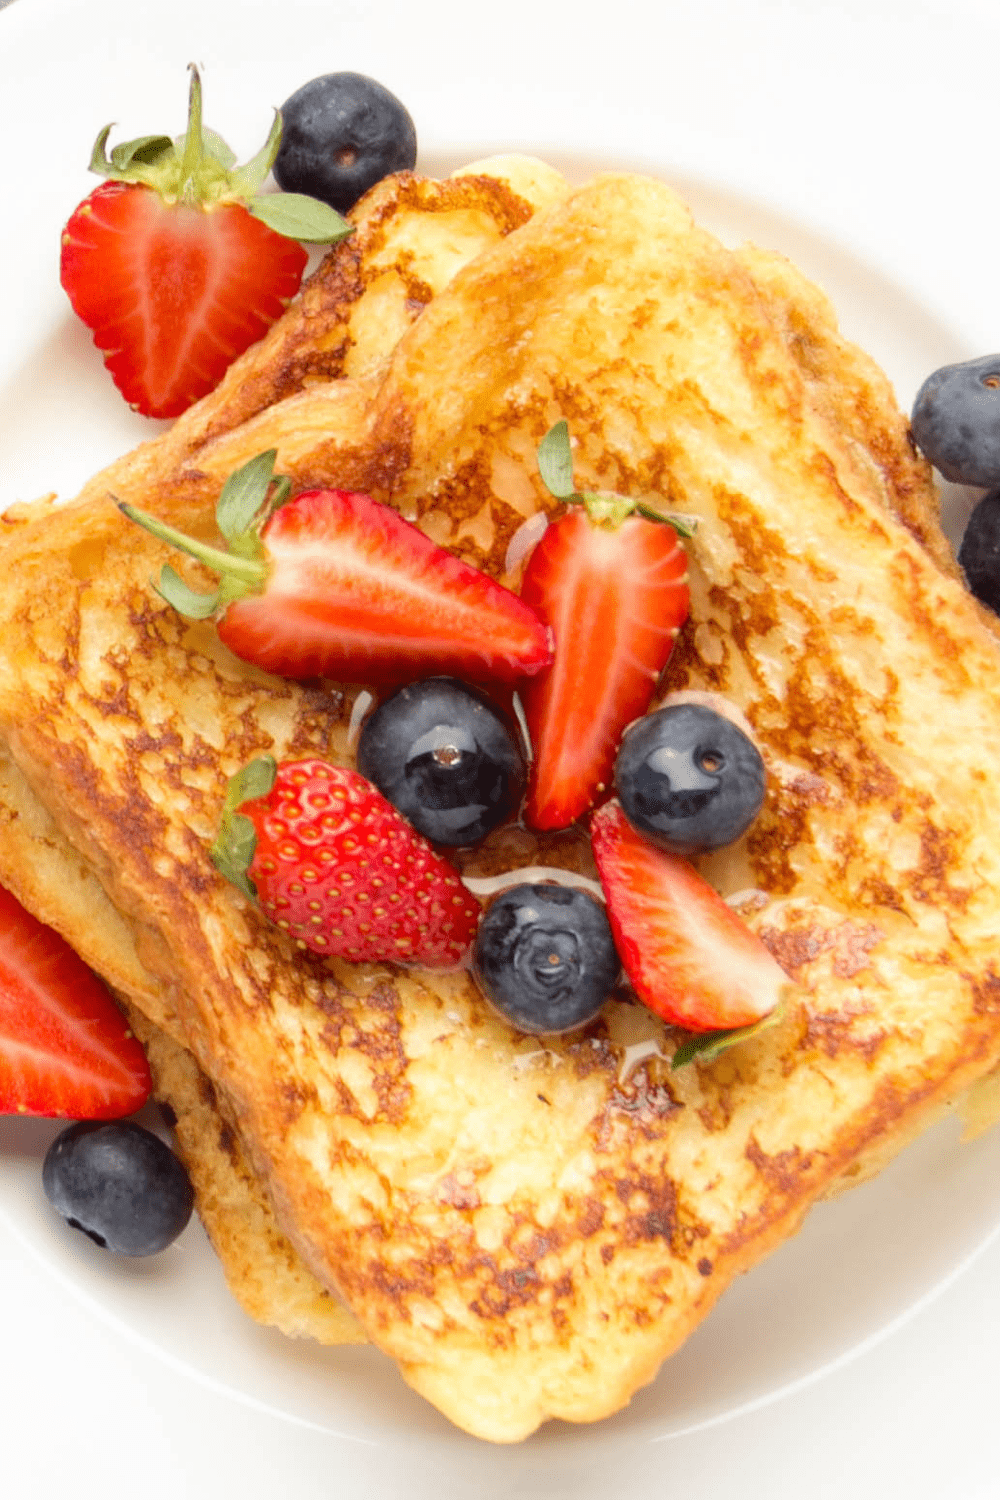 Homemade French Toast with Berries